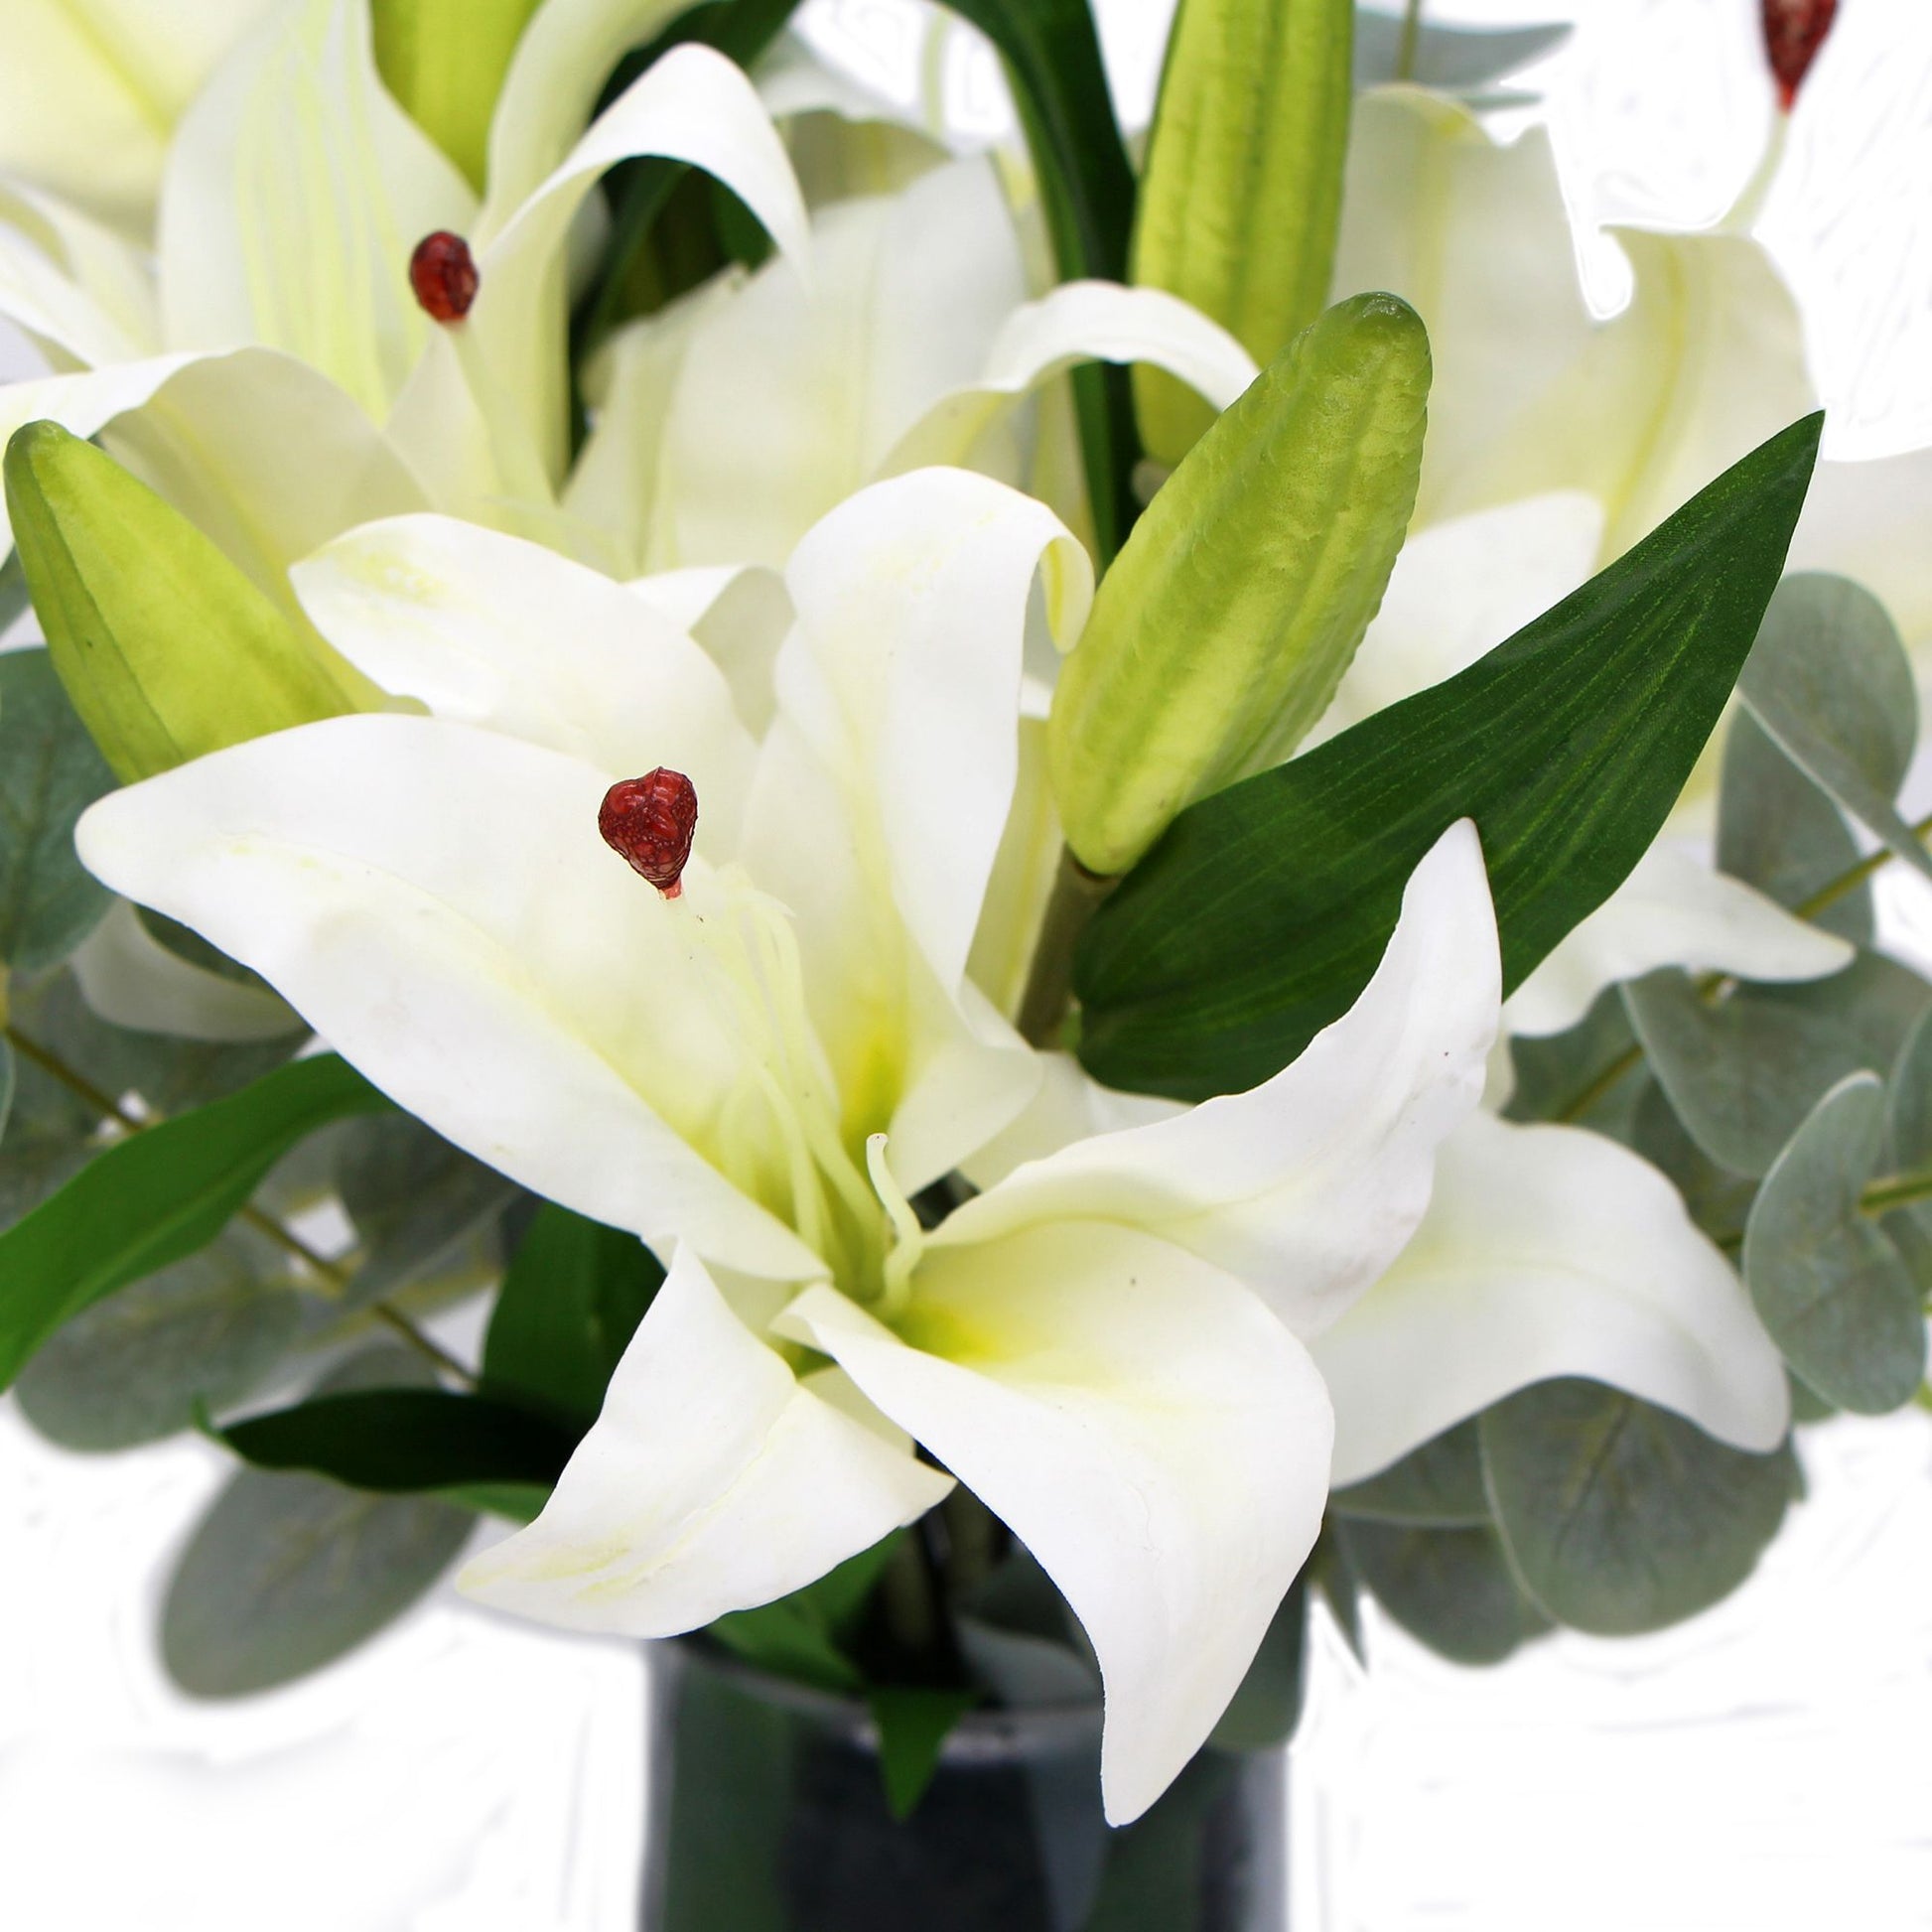 Premium Faux White Lily In Glass Vase (Tiger Lily Bouquet With Eucalyptus) - BM House & Garden